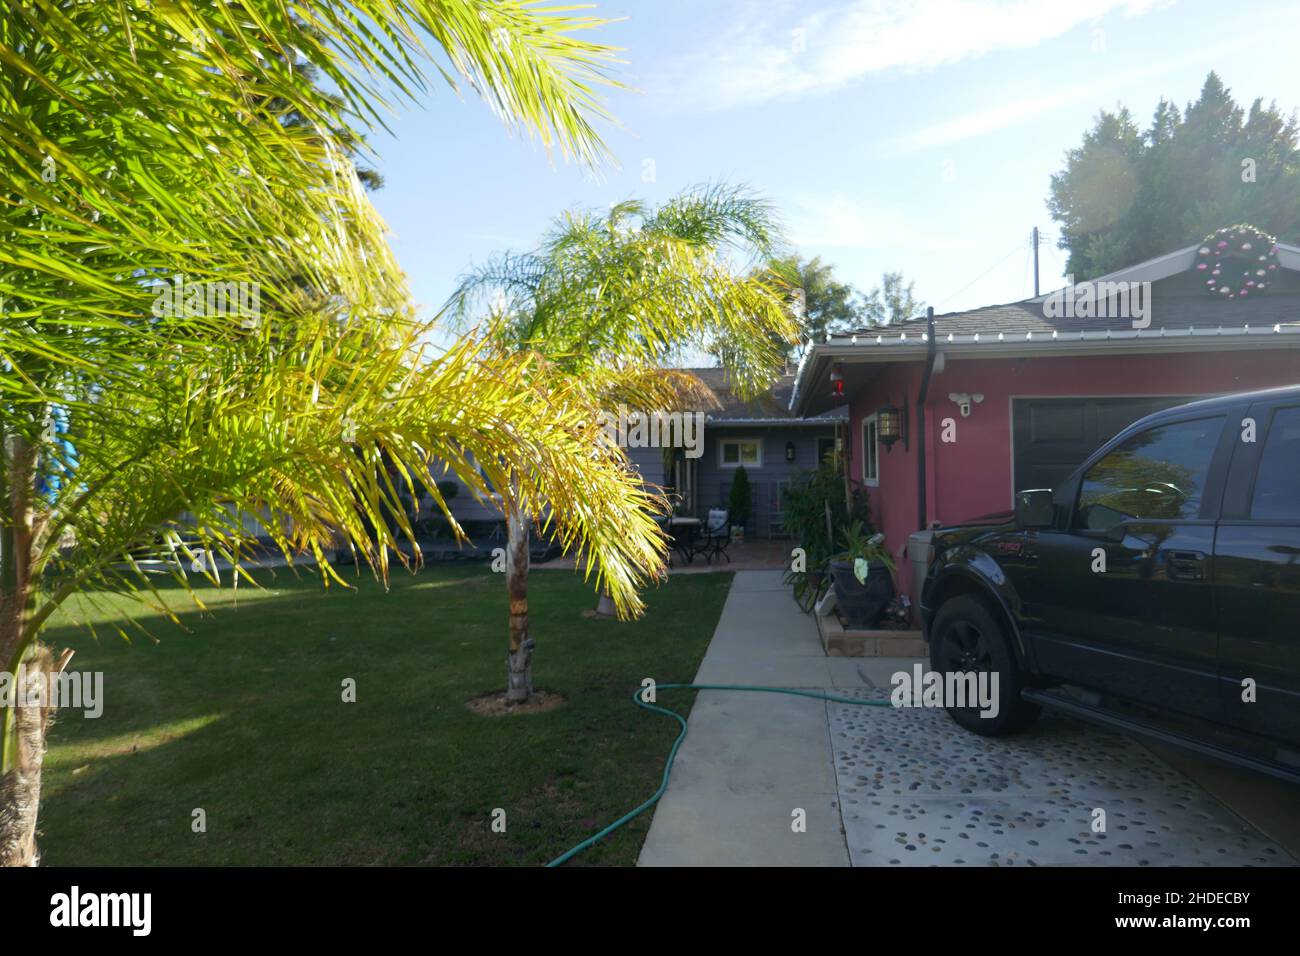 Canoga Park, California, USA 1st January 2022 A General view of atmosphere at Actress Judith Barsi's Home/house at 22100 Michale Street on January 1, 2022 in Canoga Park, California, USA. Judith Barsi was a child actress and in films including Jaws, and did voices for The Land Before Time and All Dogs Go To Heaven. This was her home and where her father murdered her and her mother then killed himself on July 25, 1988. Photo by Barry King/Alamy Stock Photo Stock Photo